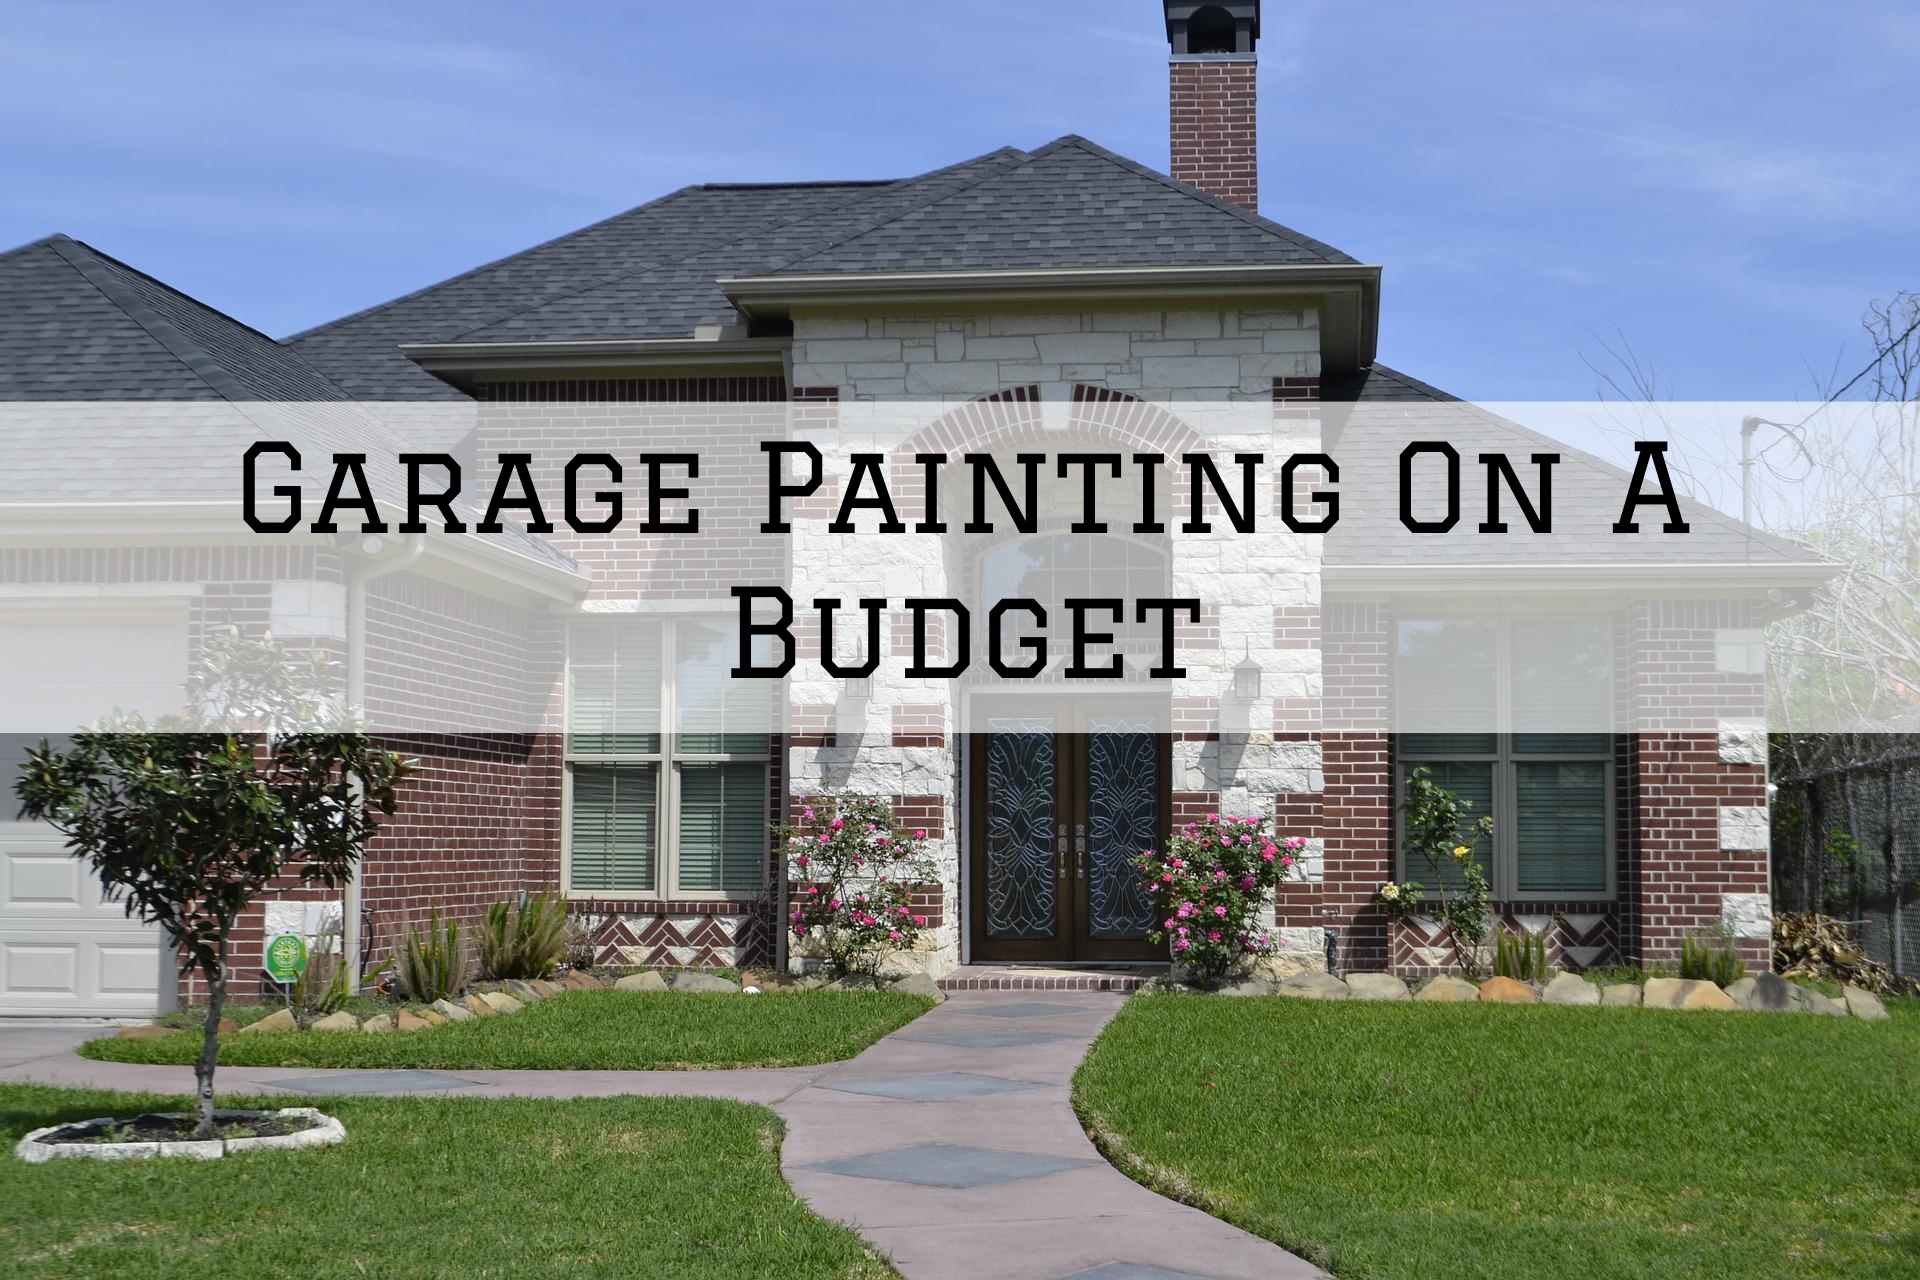 2022-06-16 Left Moon Painting Unionville PA Garage Painting Budget